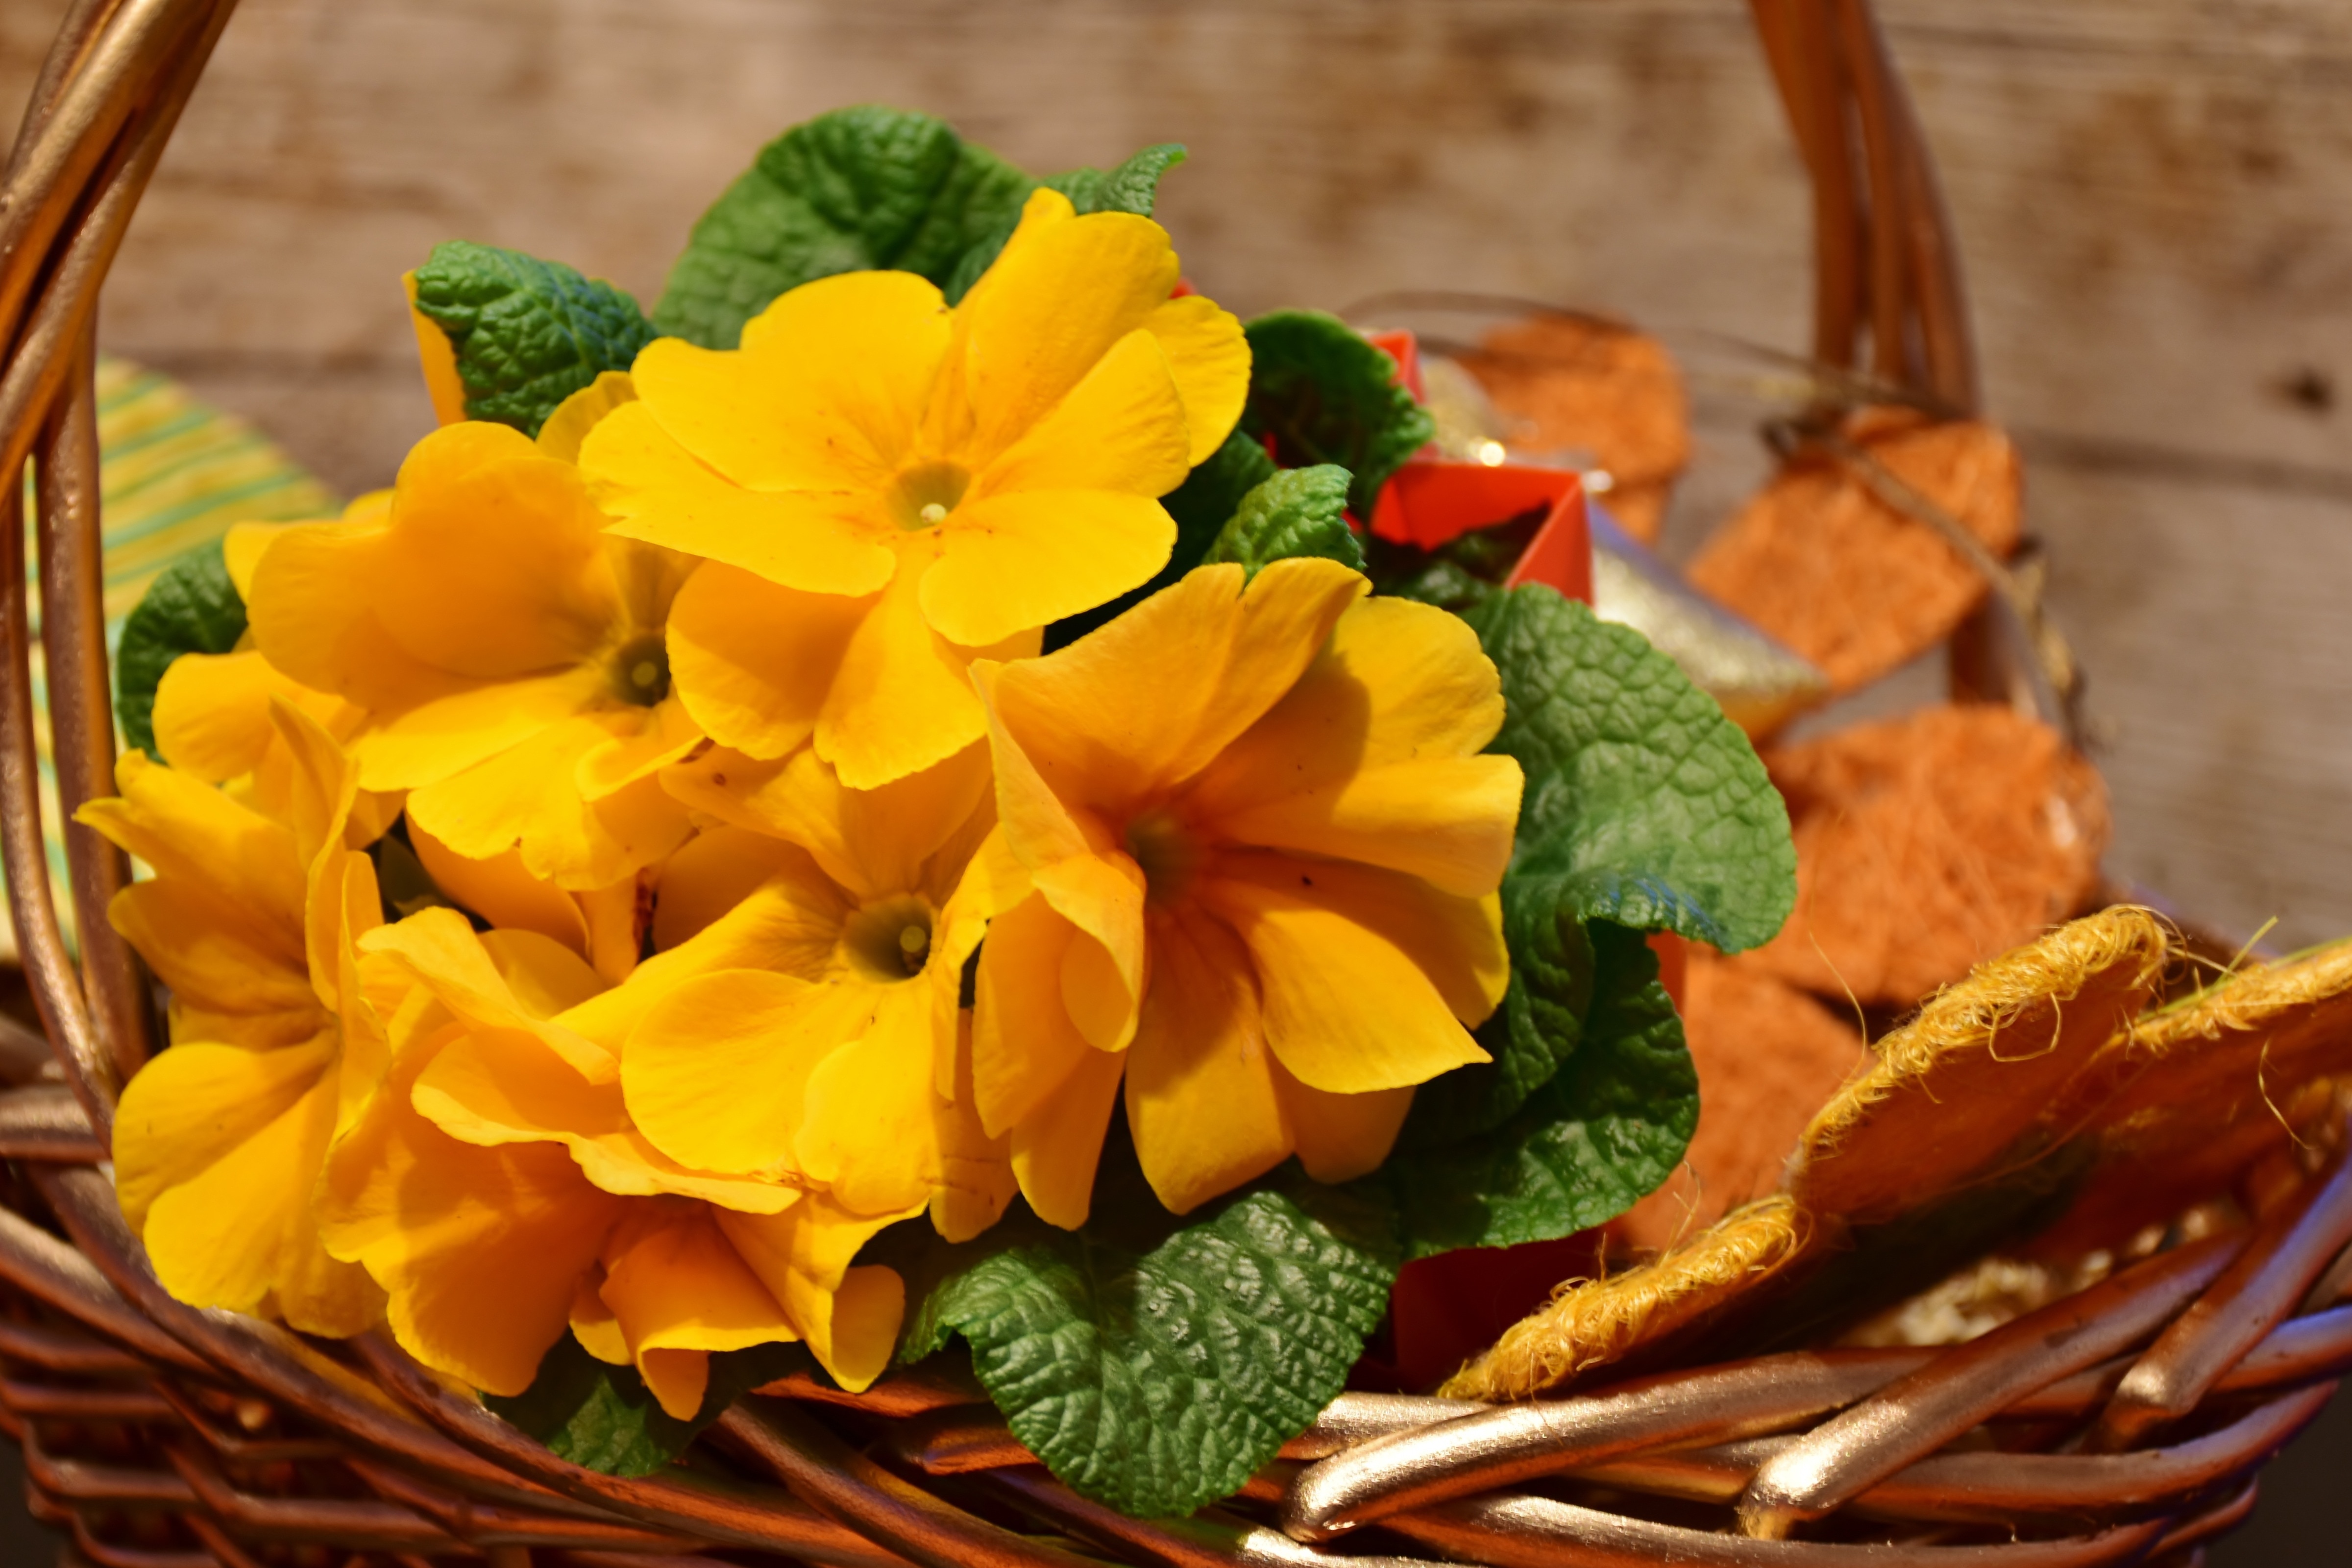 brown wicker basket with yellow petaled flowers